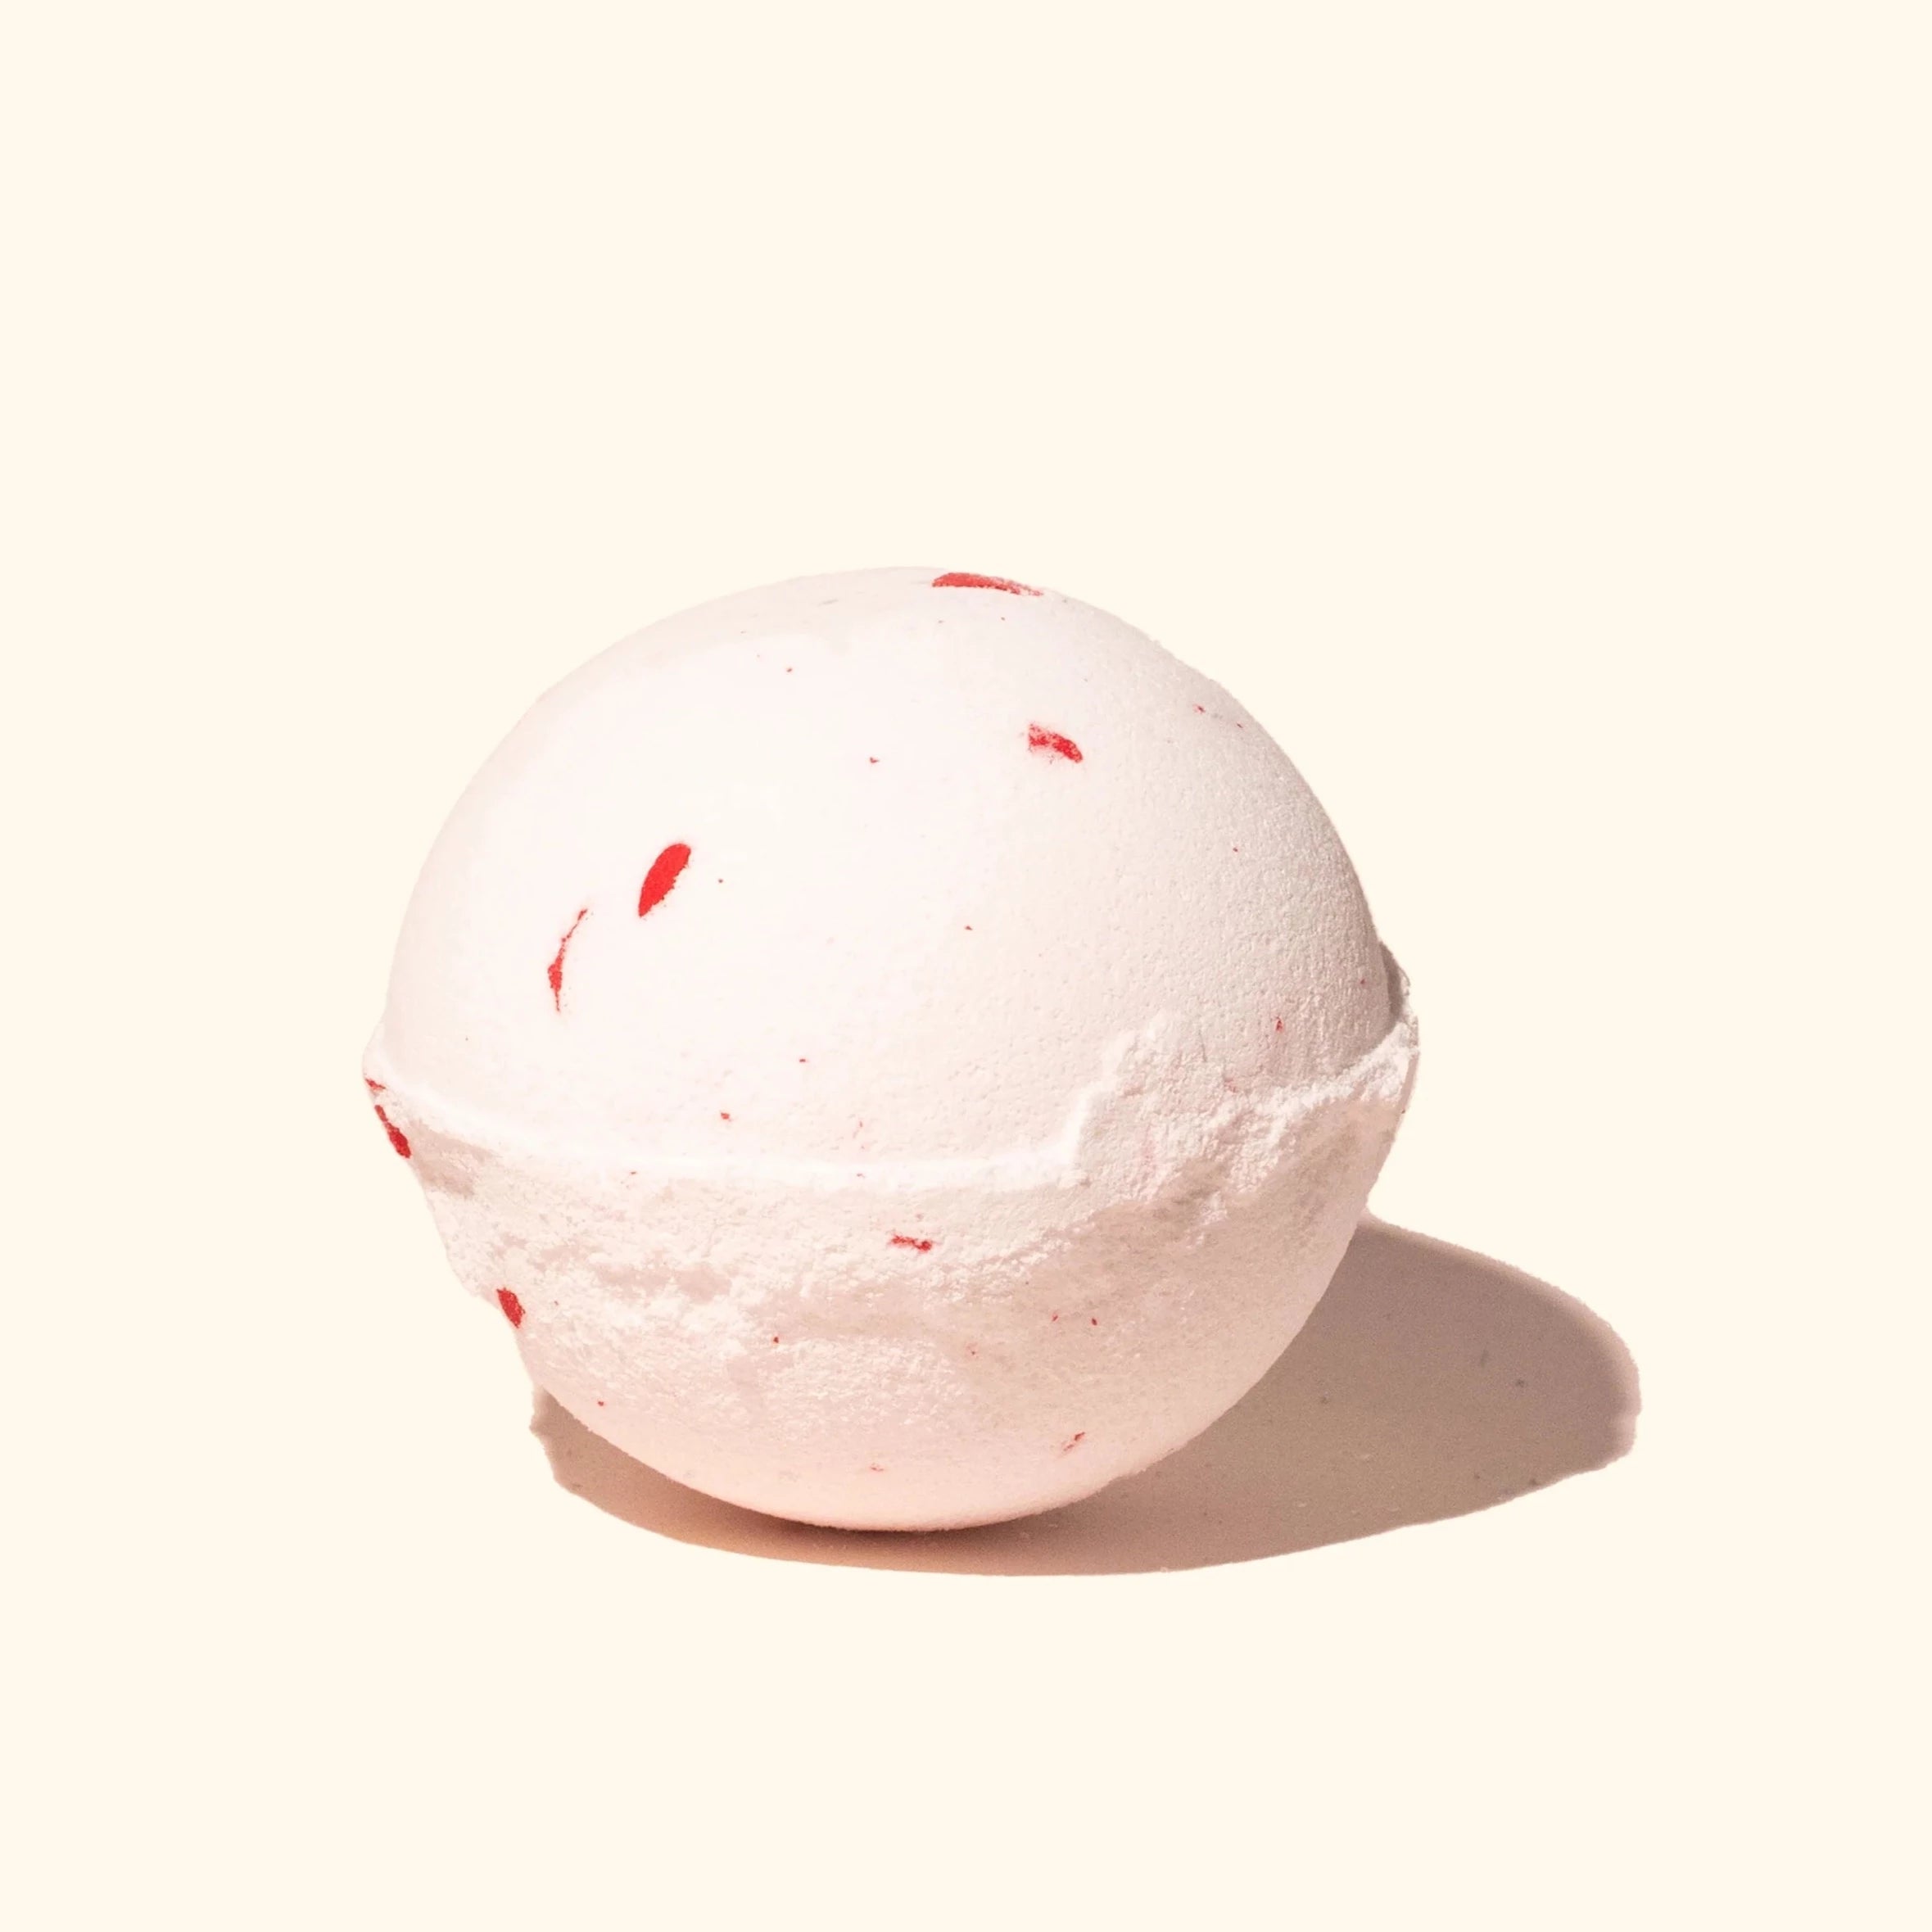 white bath bomb with red specks in it